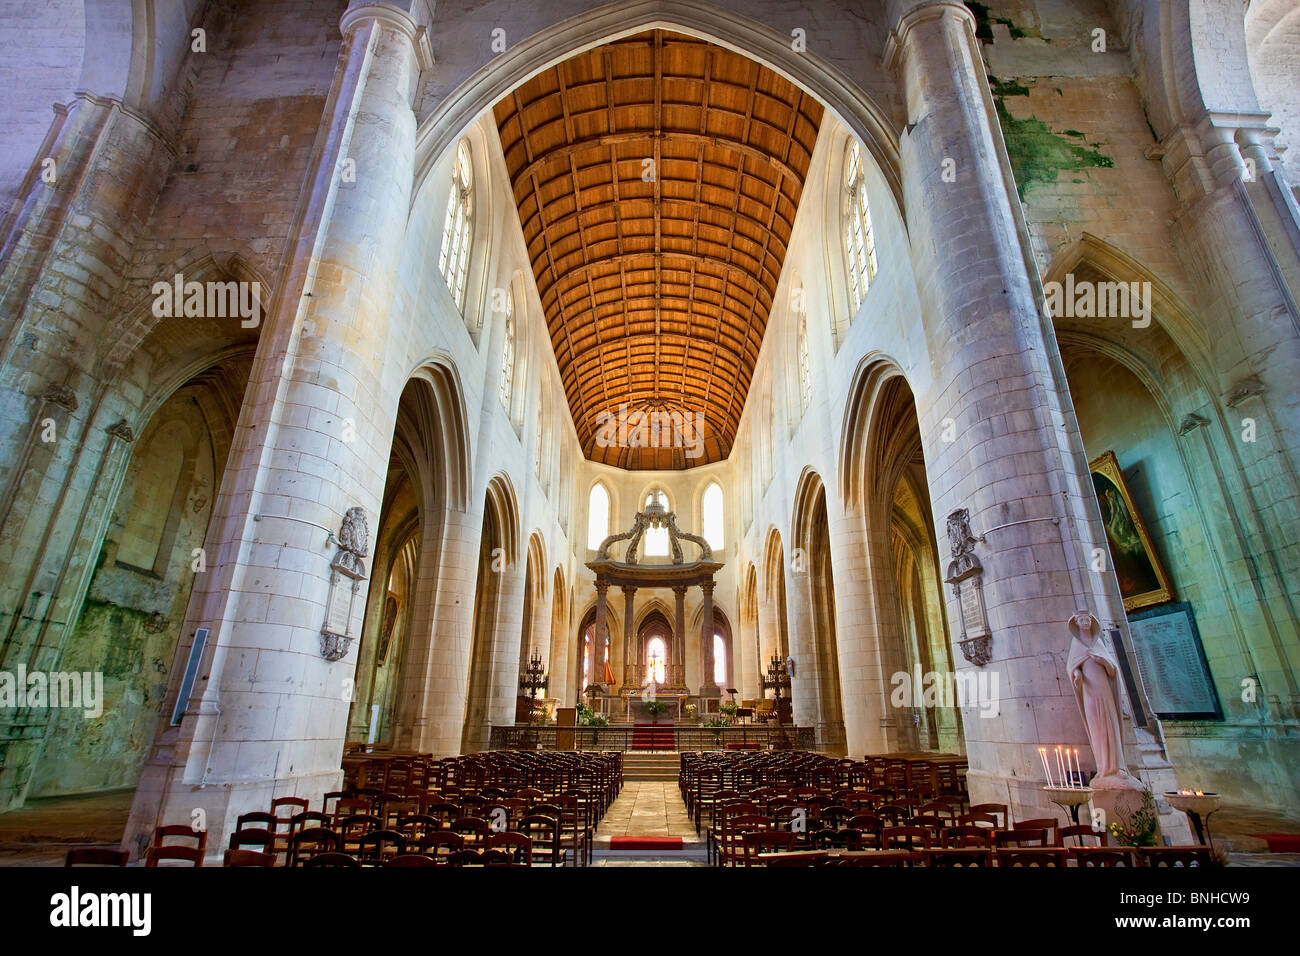 Europa, Frankreich, Charente-Maritime (17), Kathedrale St. Peter Stockfoto